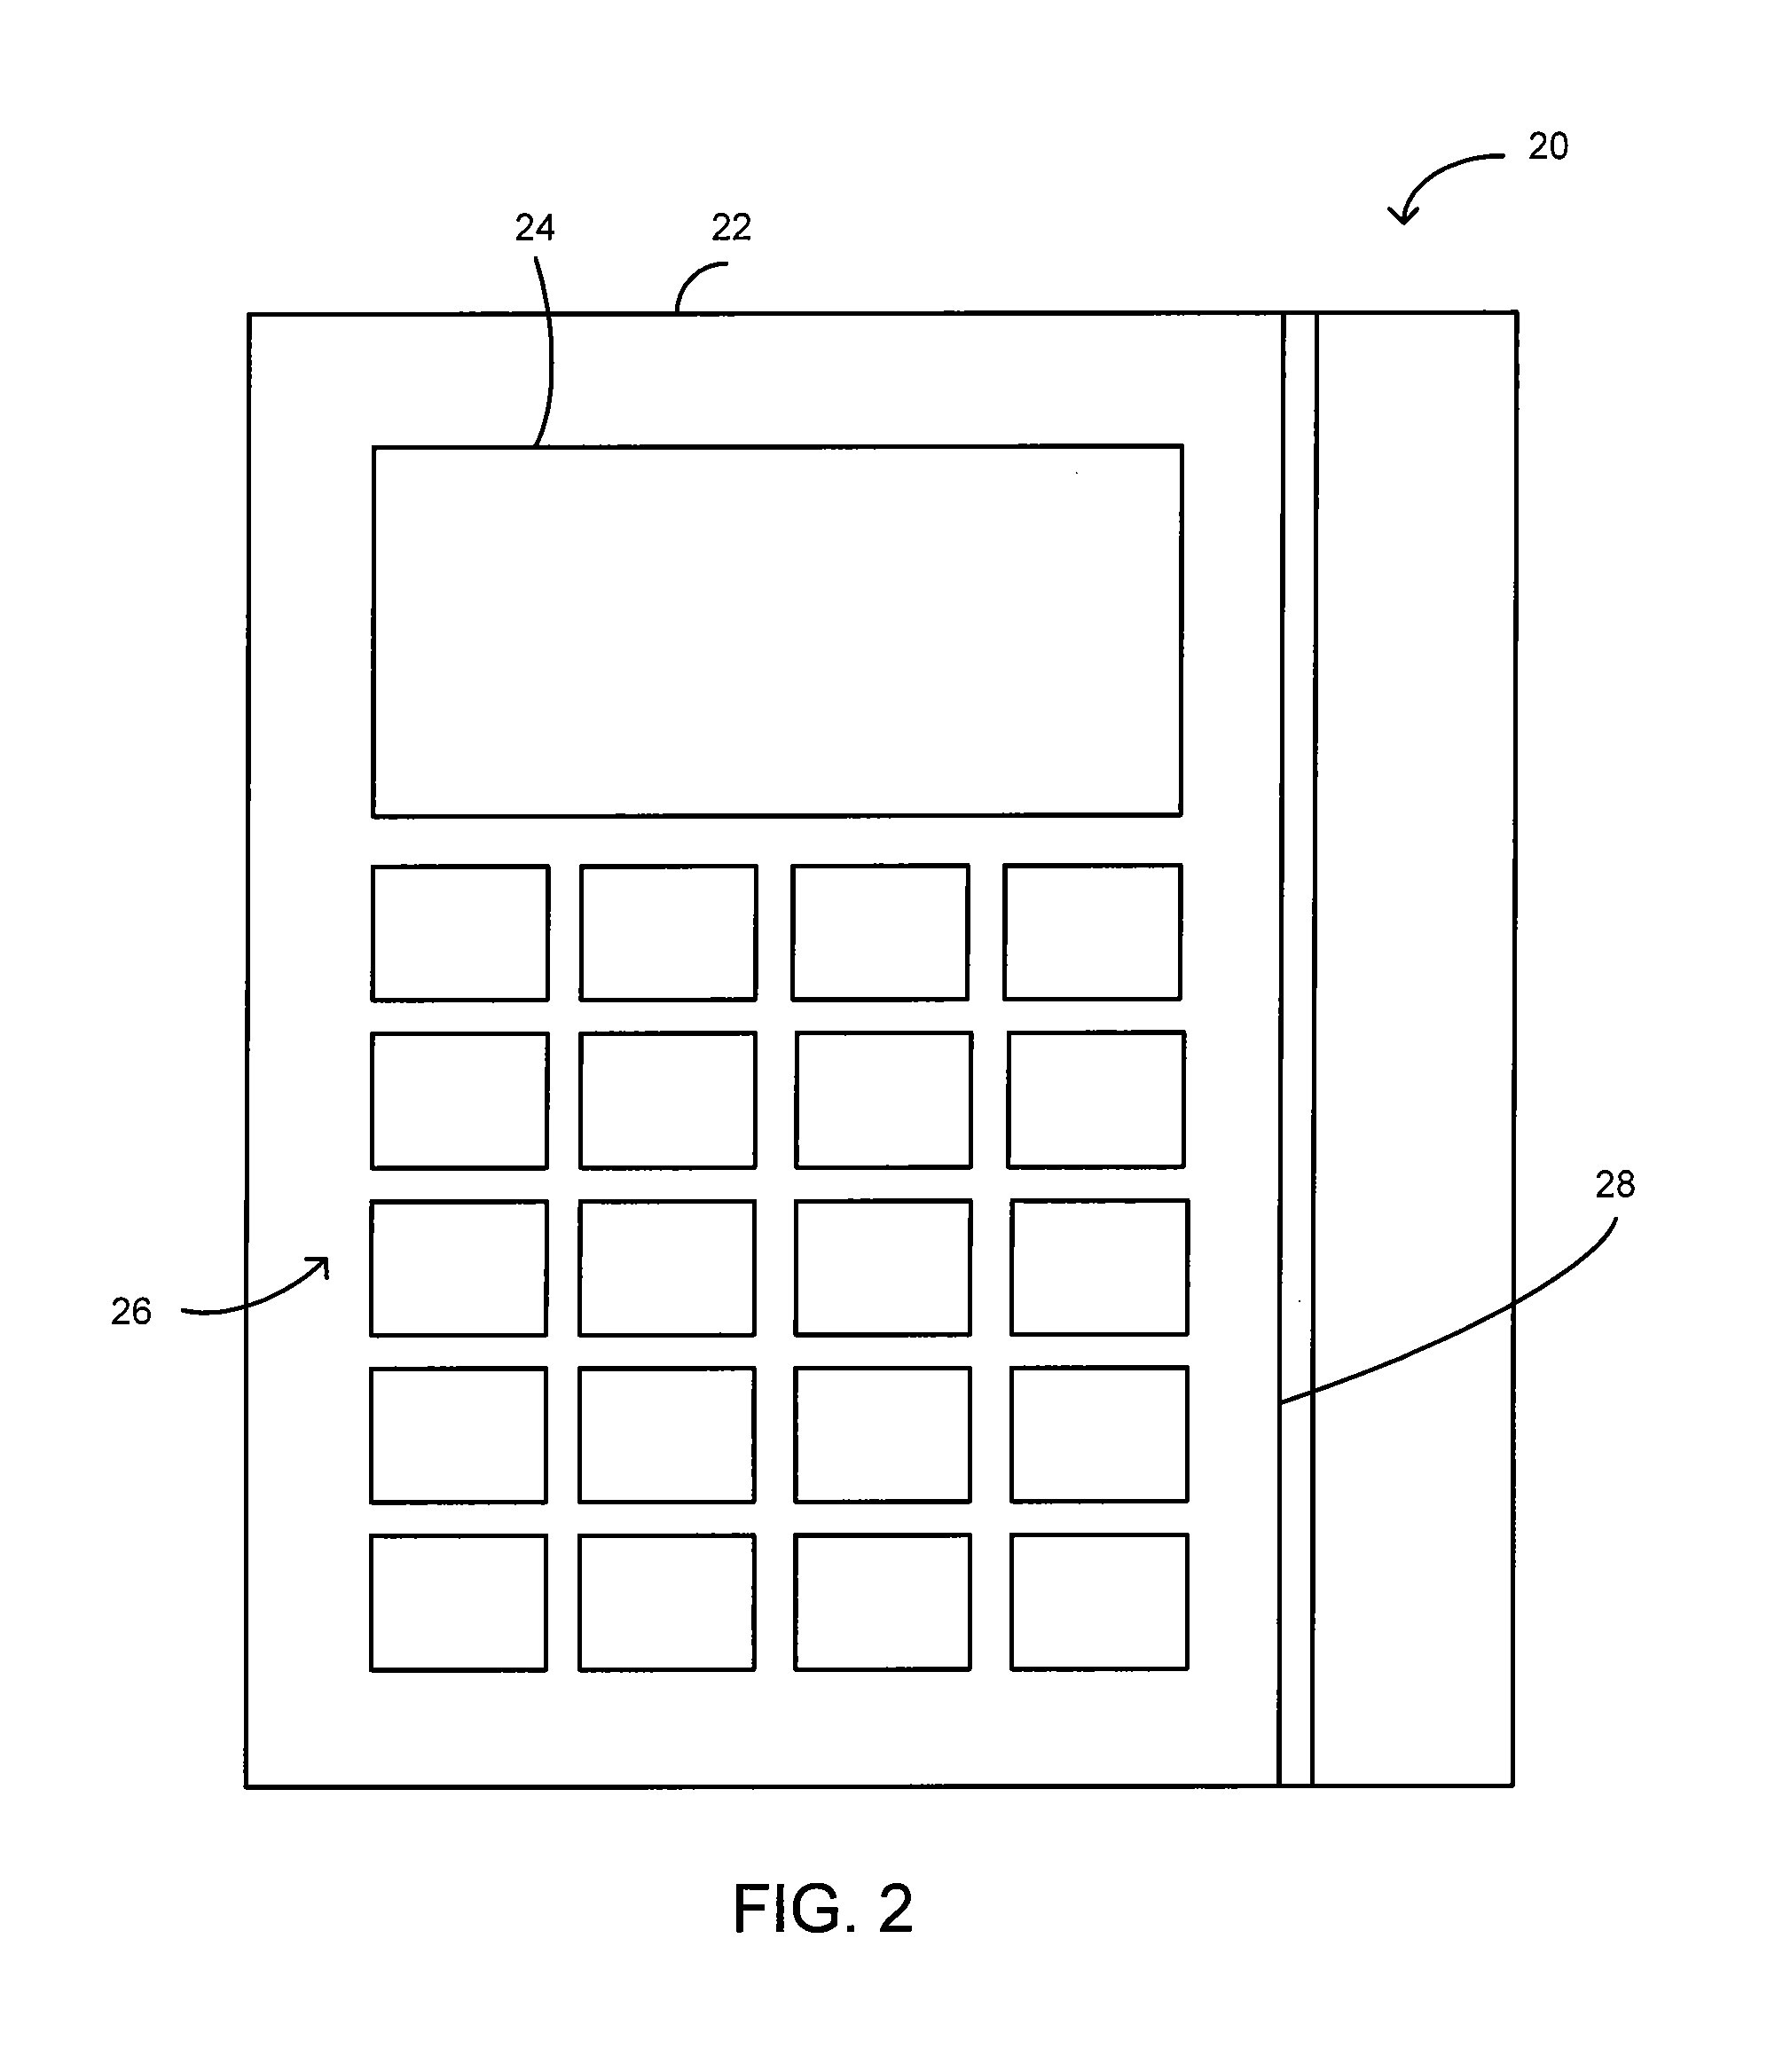 Multi-purse card system and methods